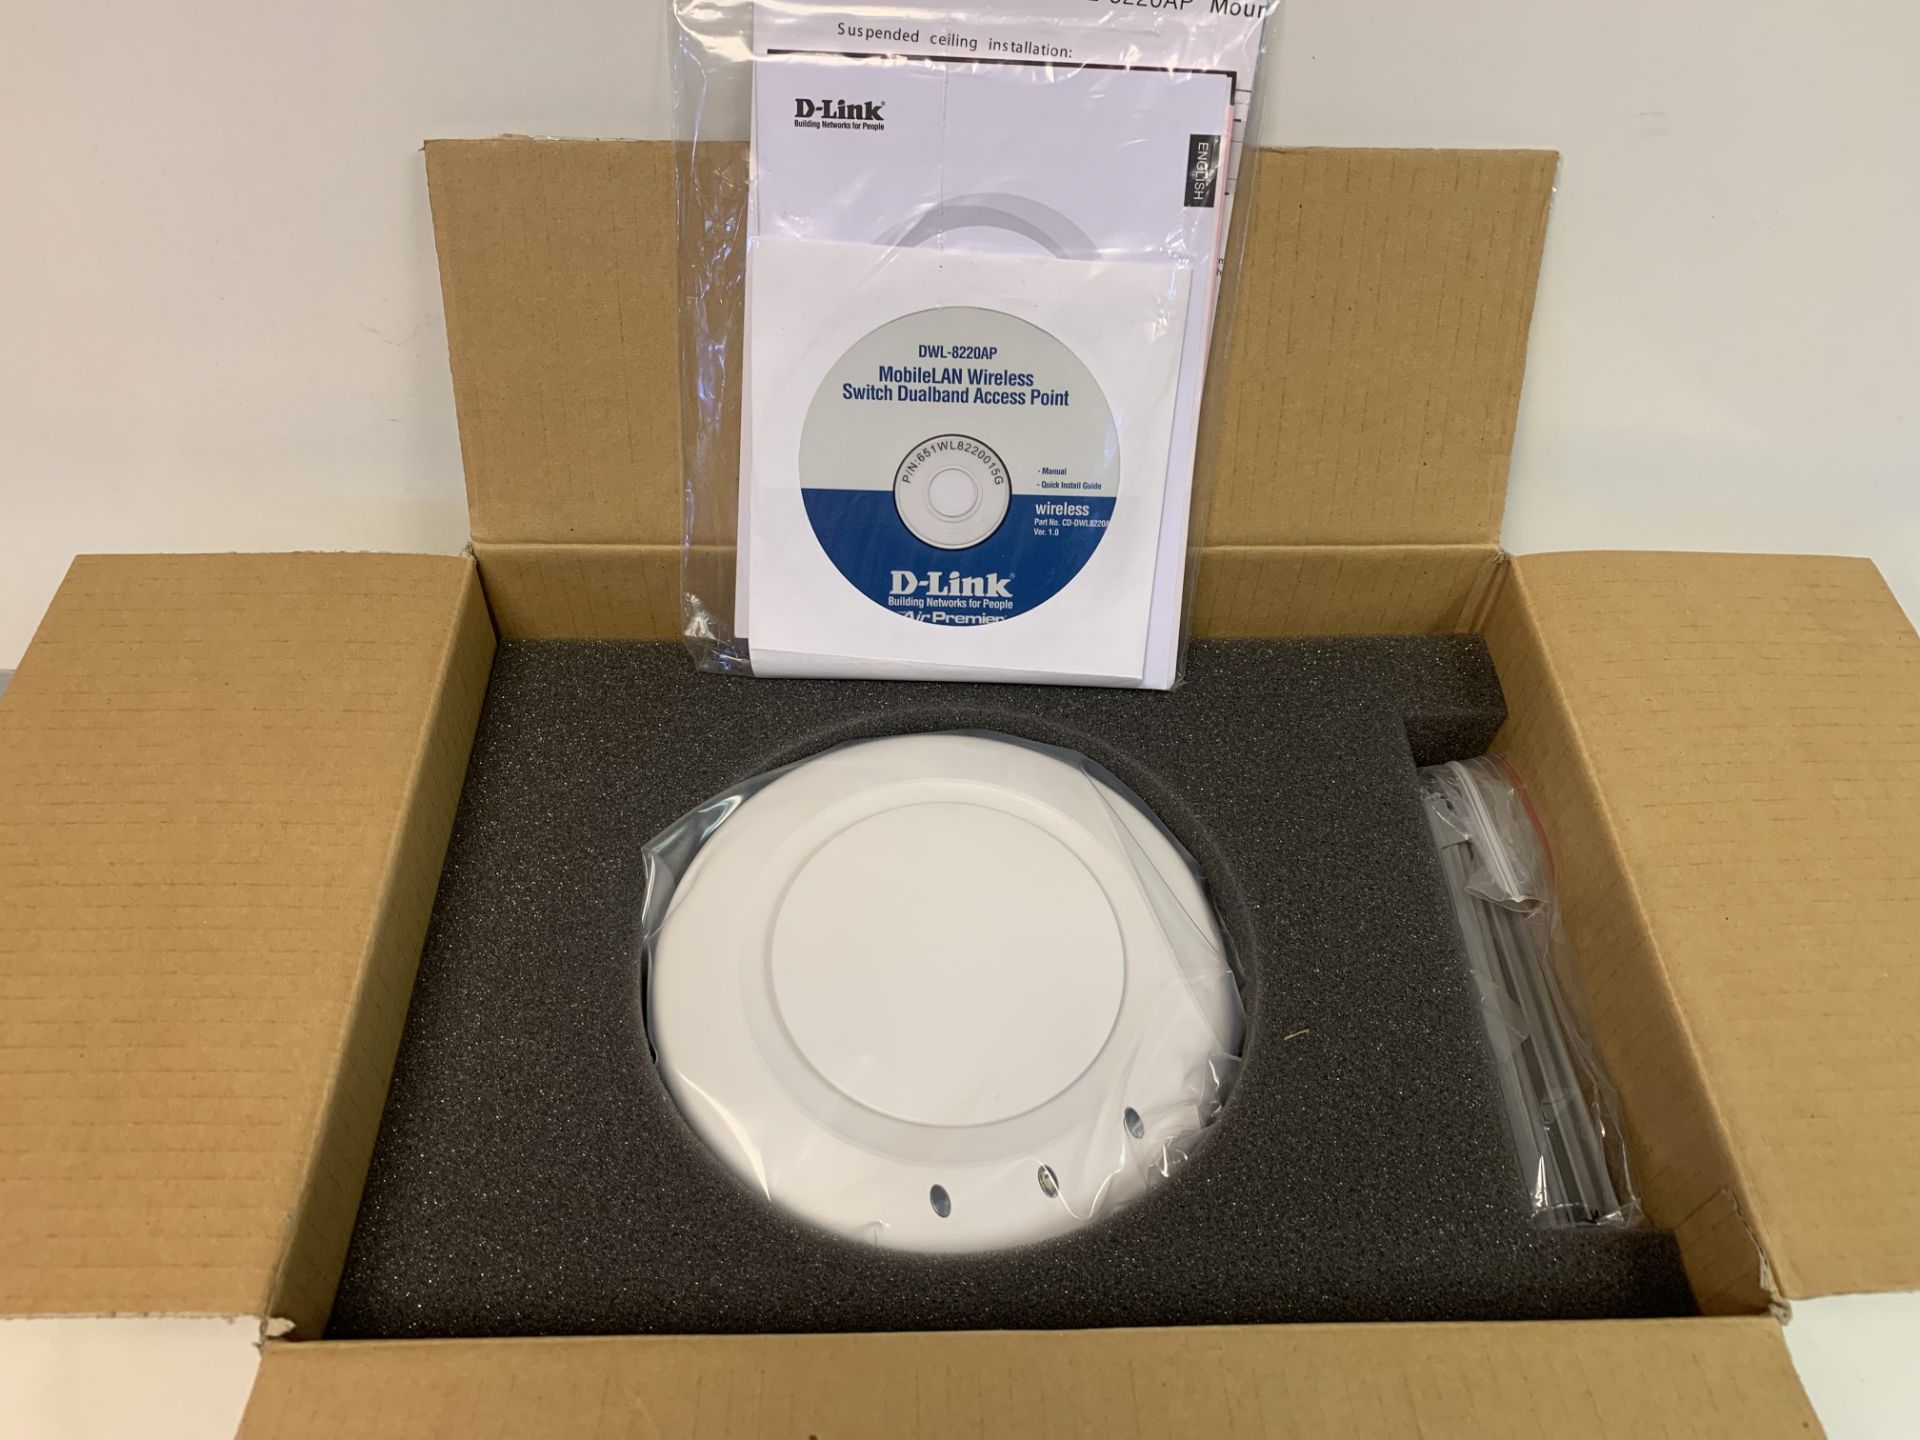 2 X BRAND NEW D LINK UNIFIED WIRELESS ACCESS POINTS DWL (8220AP) RRP £210 EACH